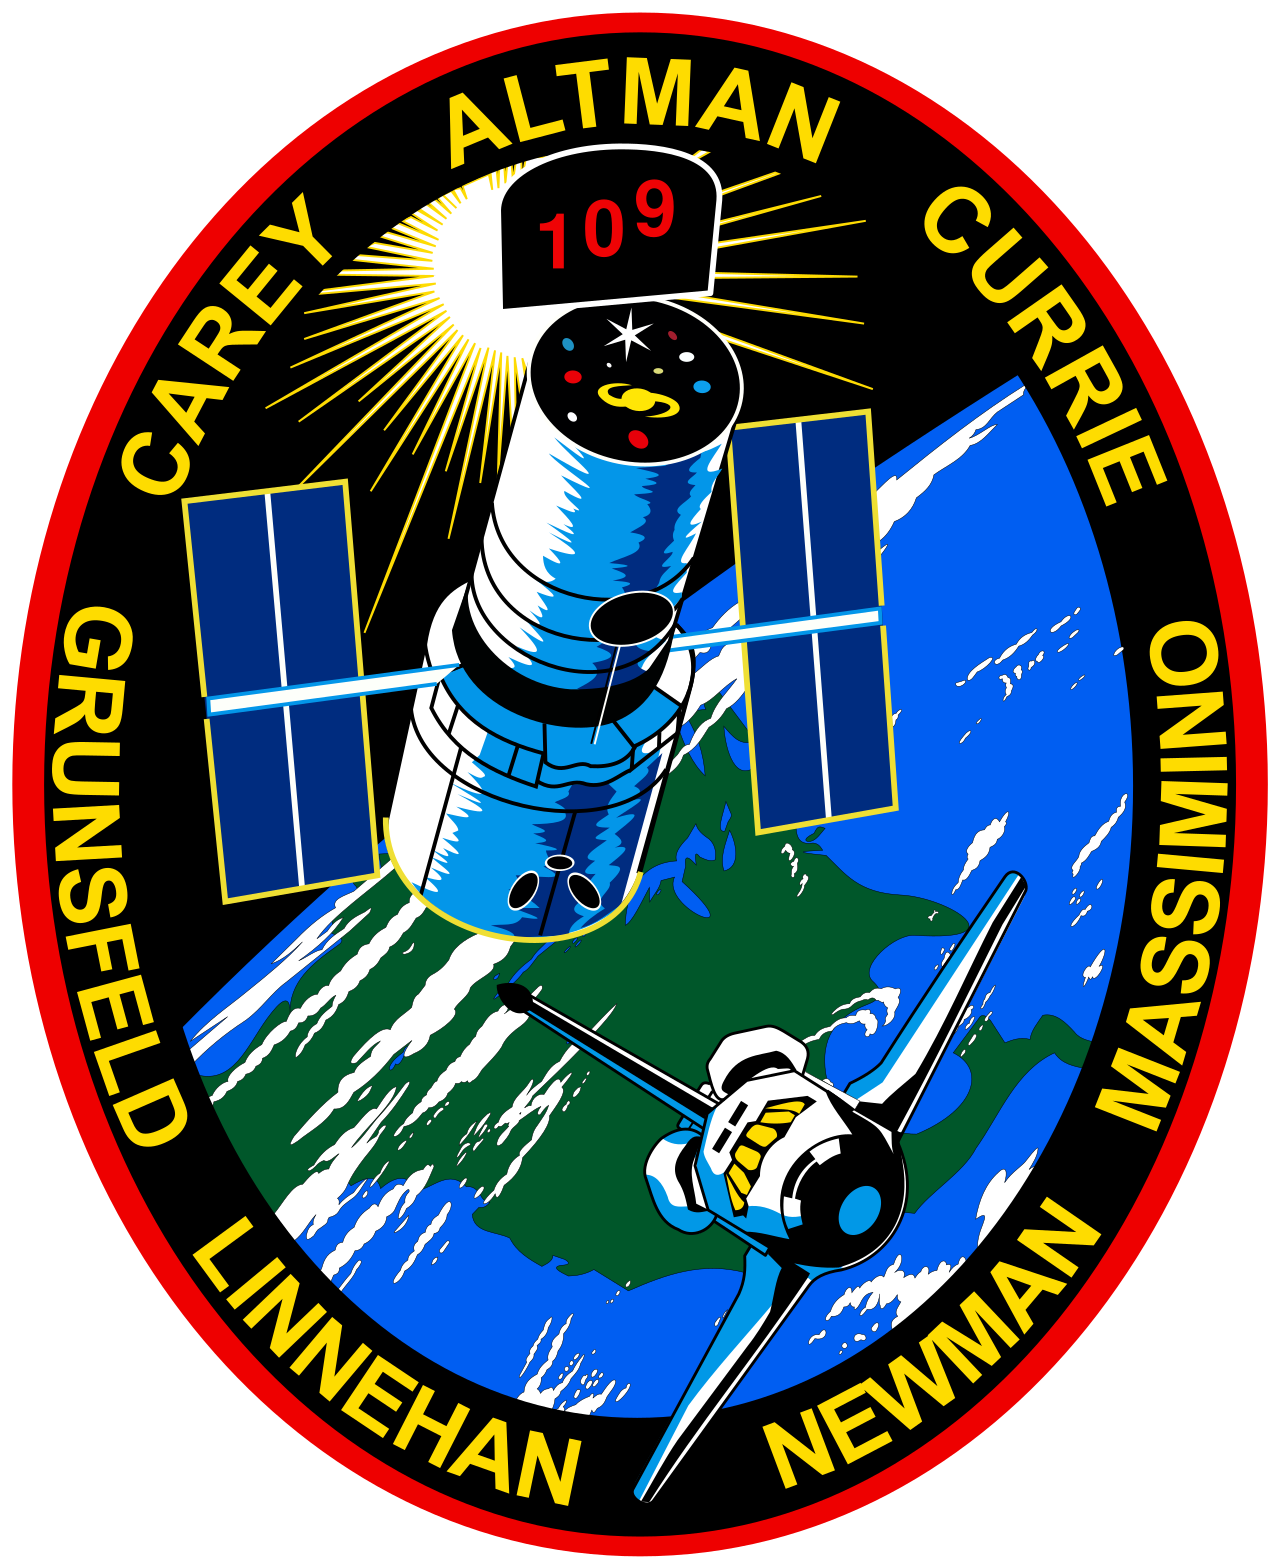 Mission patch for STS-109